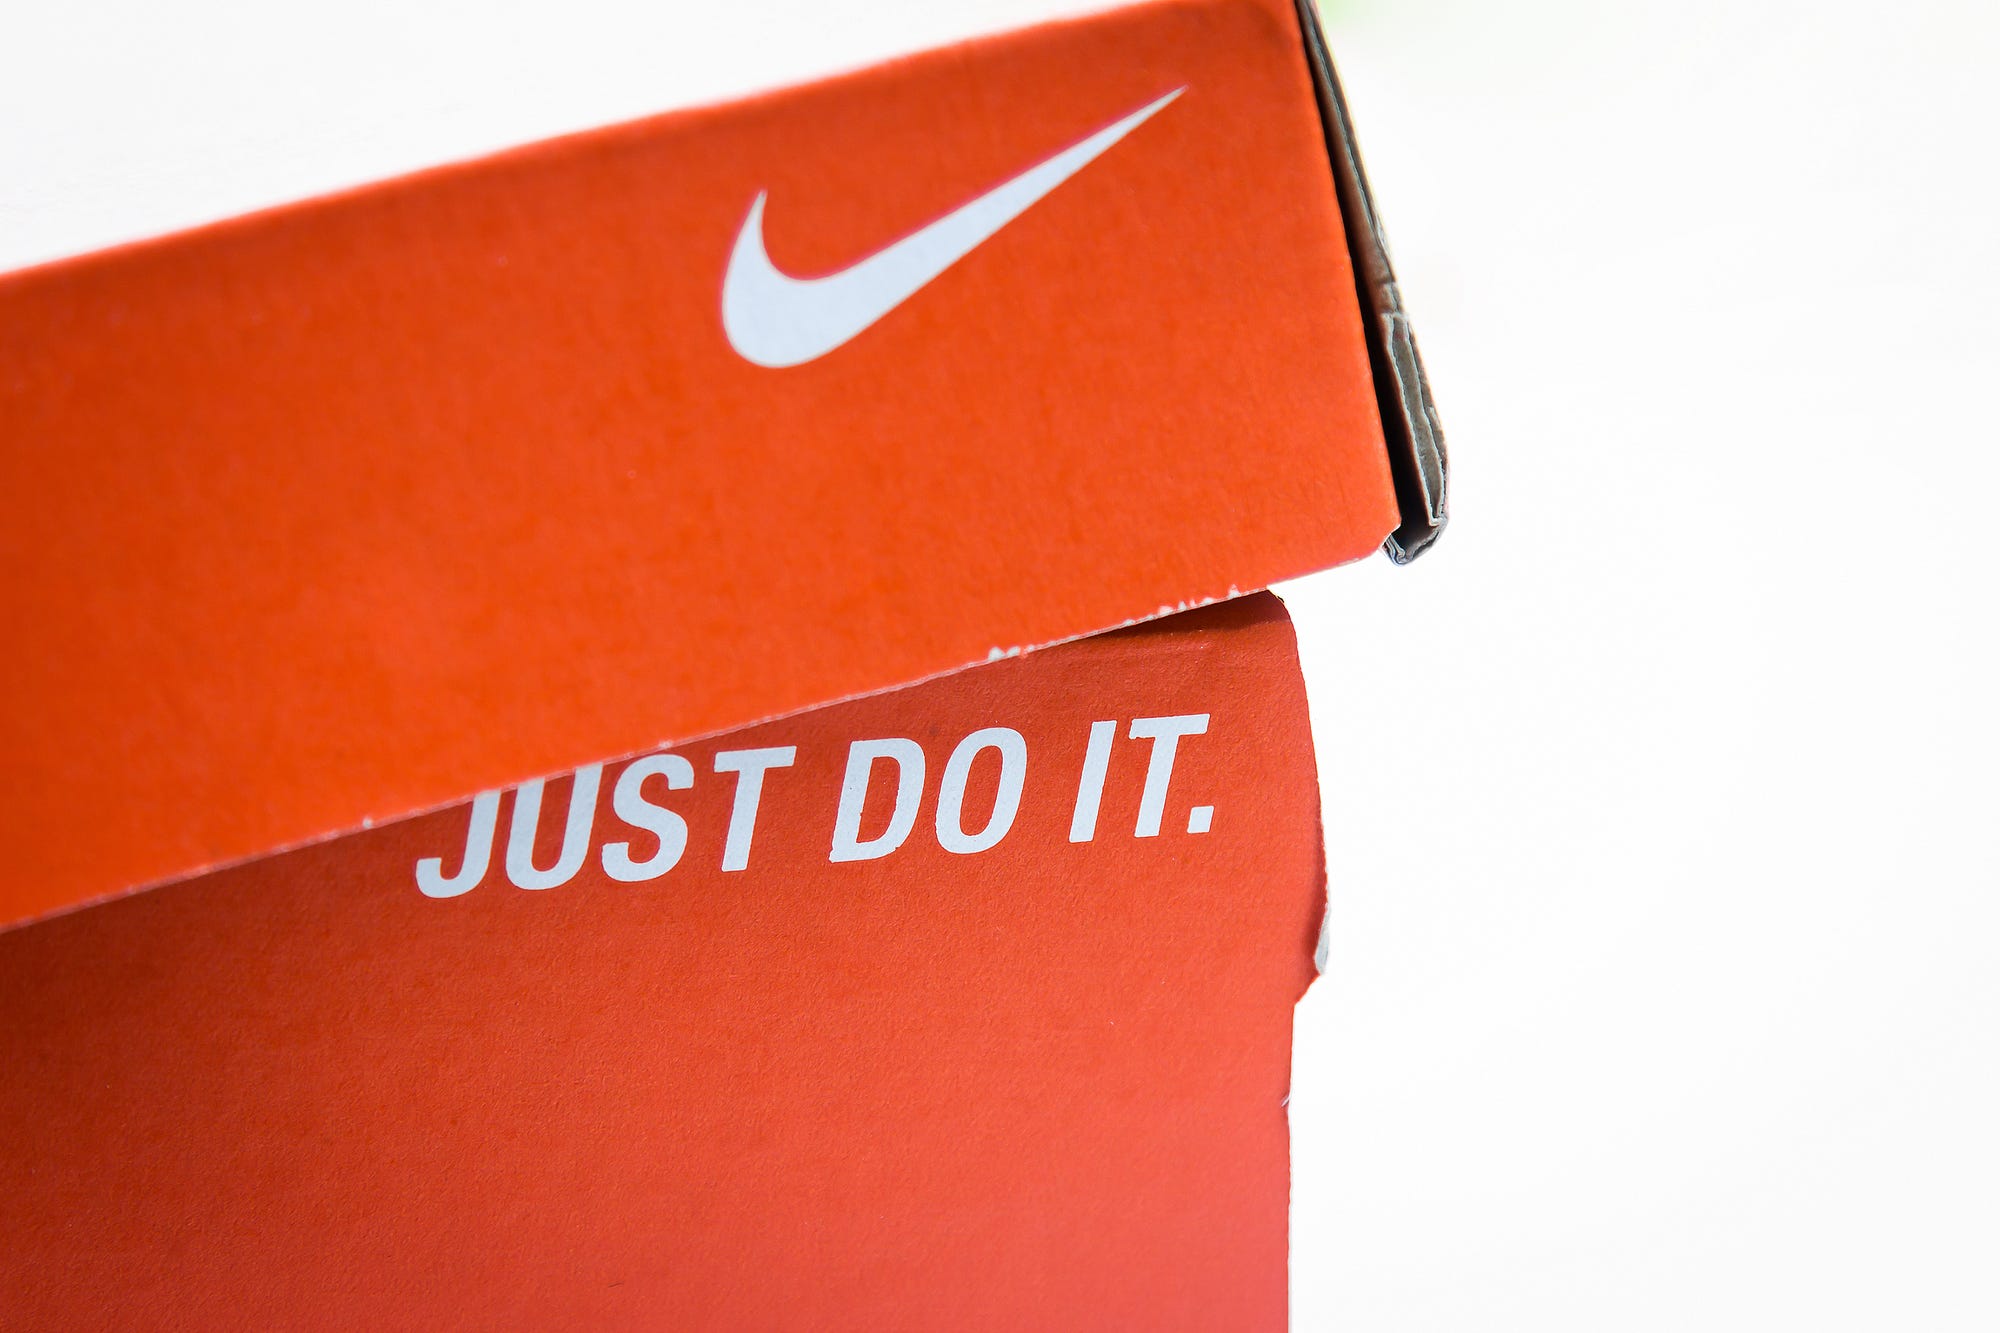 The meaning of Nike's 'Just Do It' slogan, Nike Ad